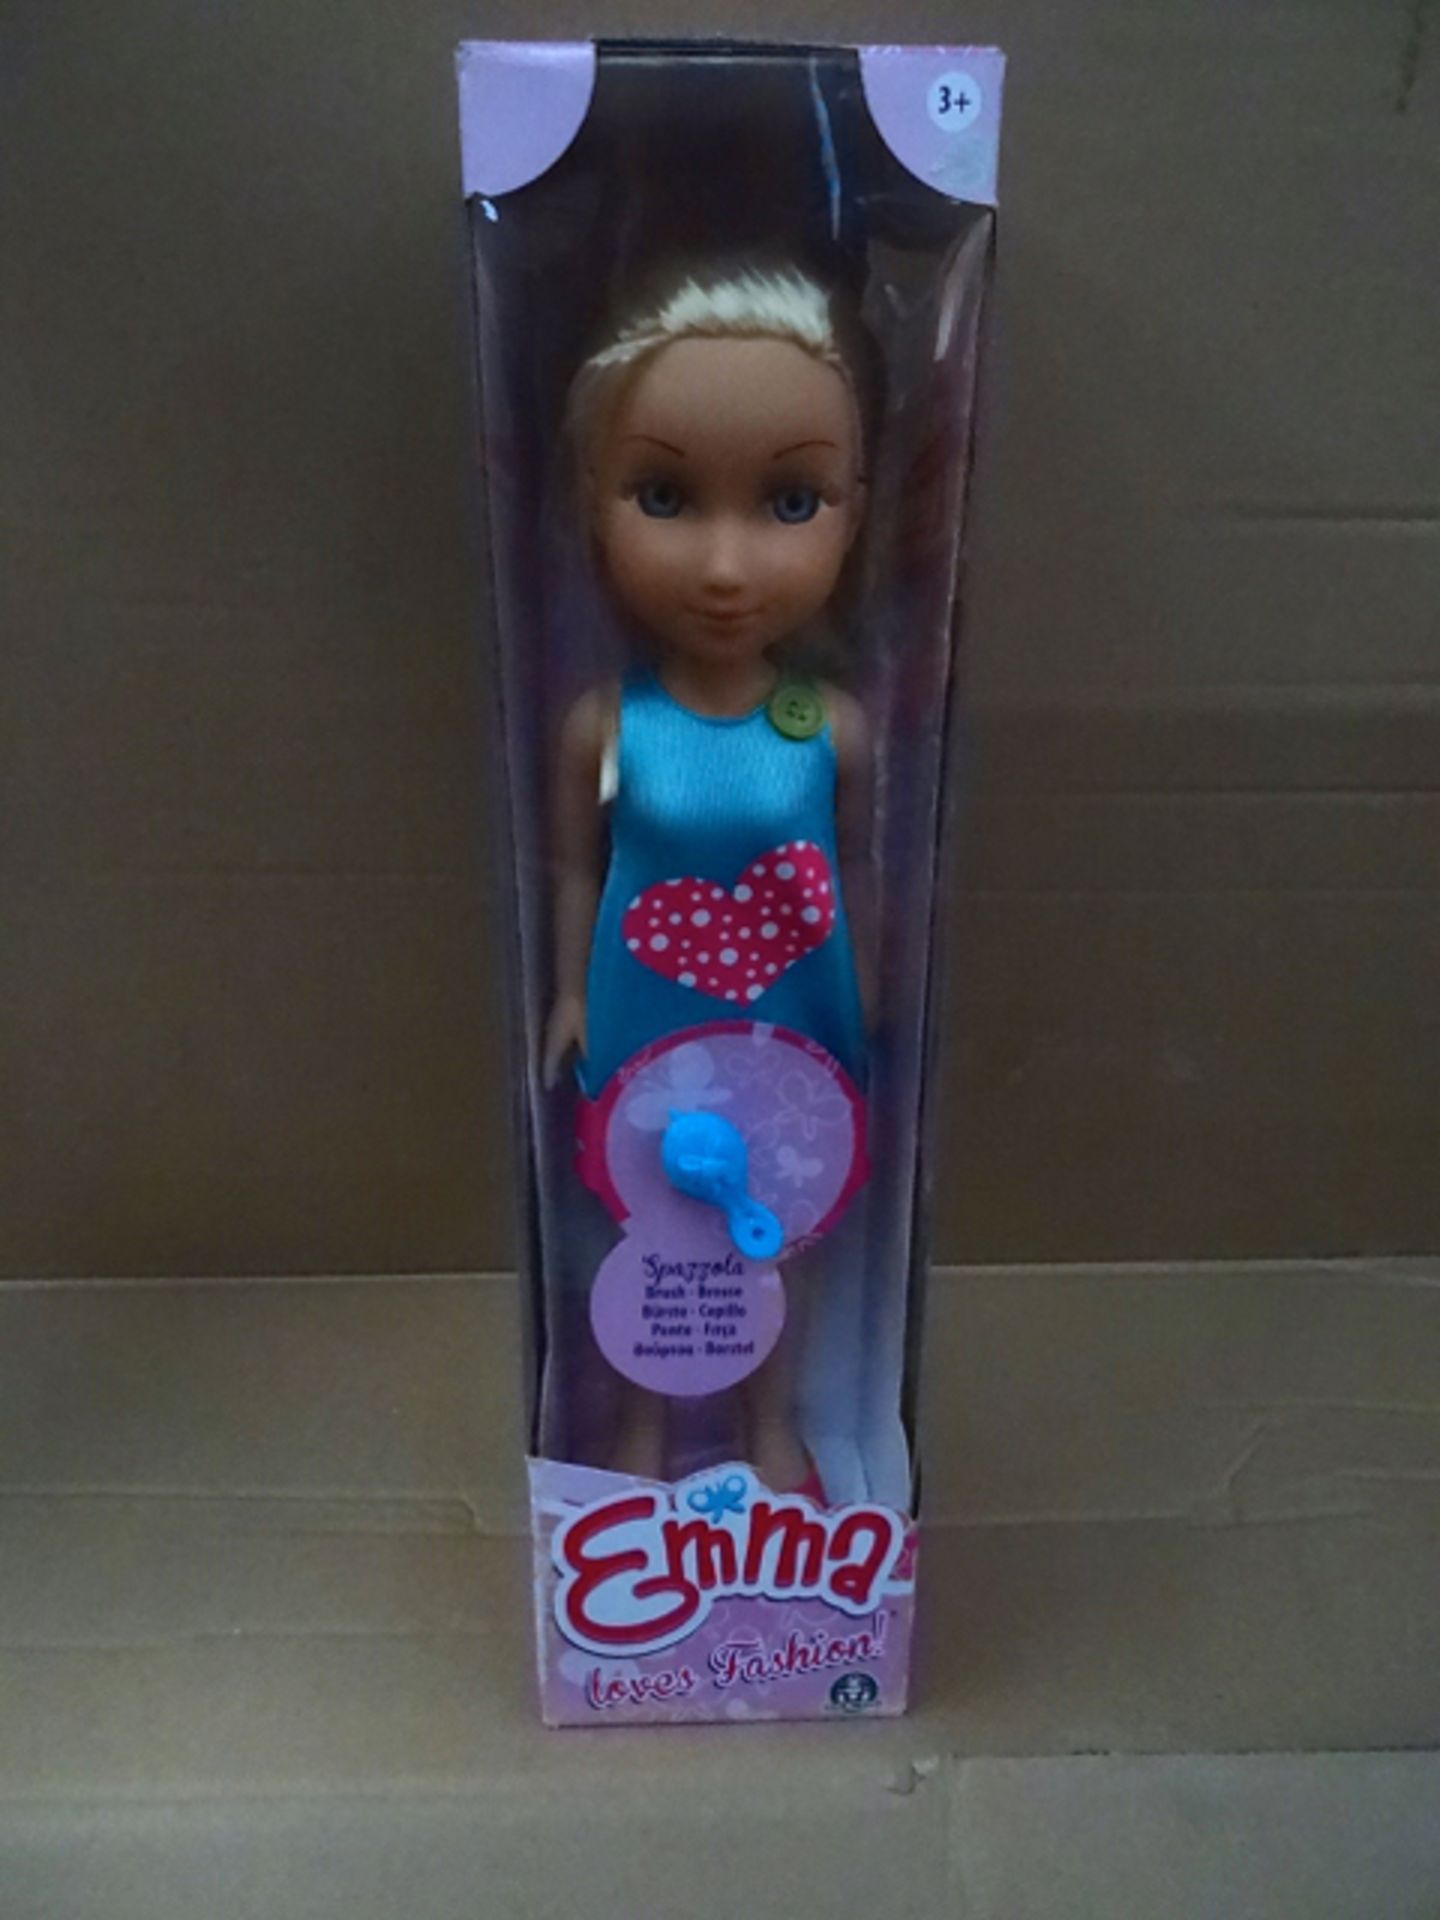 12 x Emma Loves Fashion Large Doll Set. RRP £32.99 Each! Total RRP Value £395.88! Brand new and